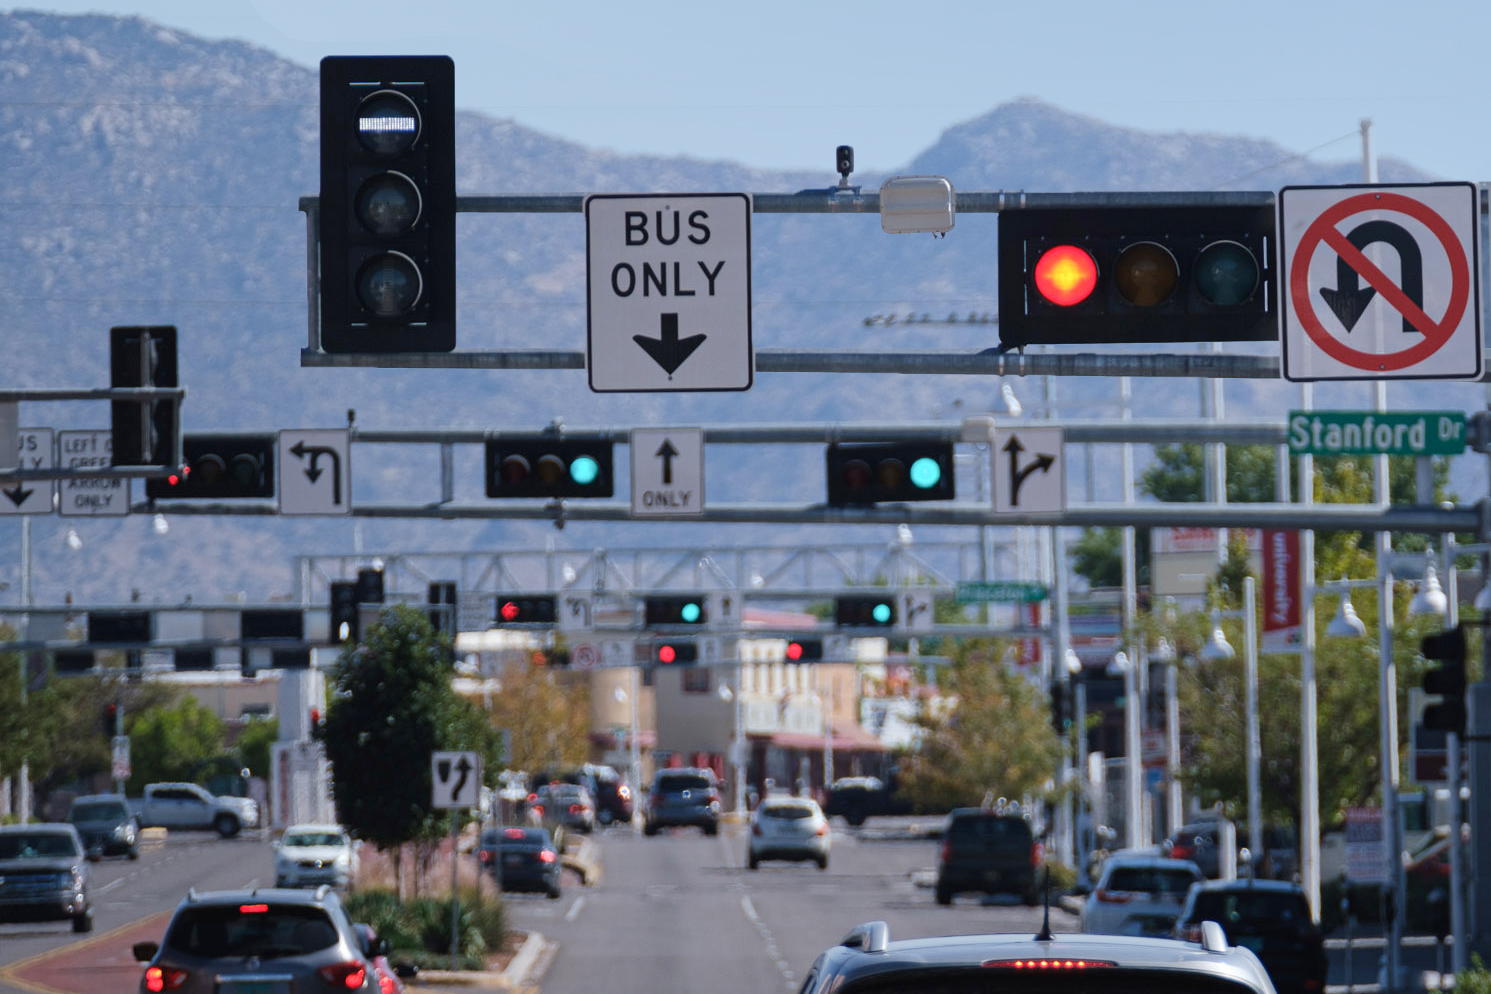 A photo of traffic lights and a bus only sign